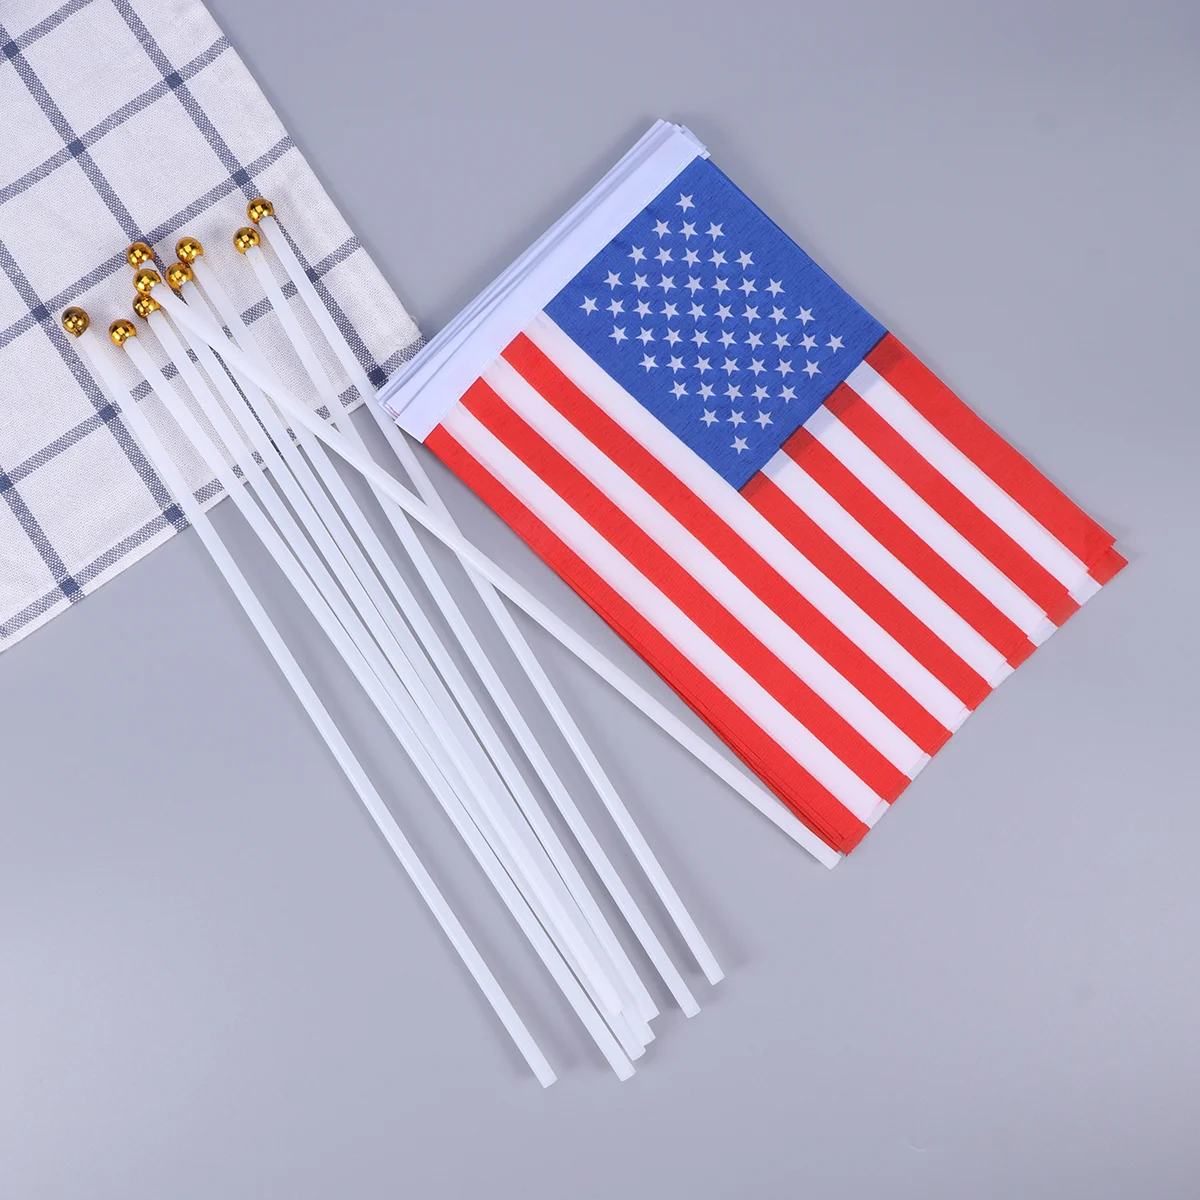 

America Hand Held Flags 20pcs Flag on Small Miniature National Flags with Pole for Parades Events Festival Celebrations